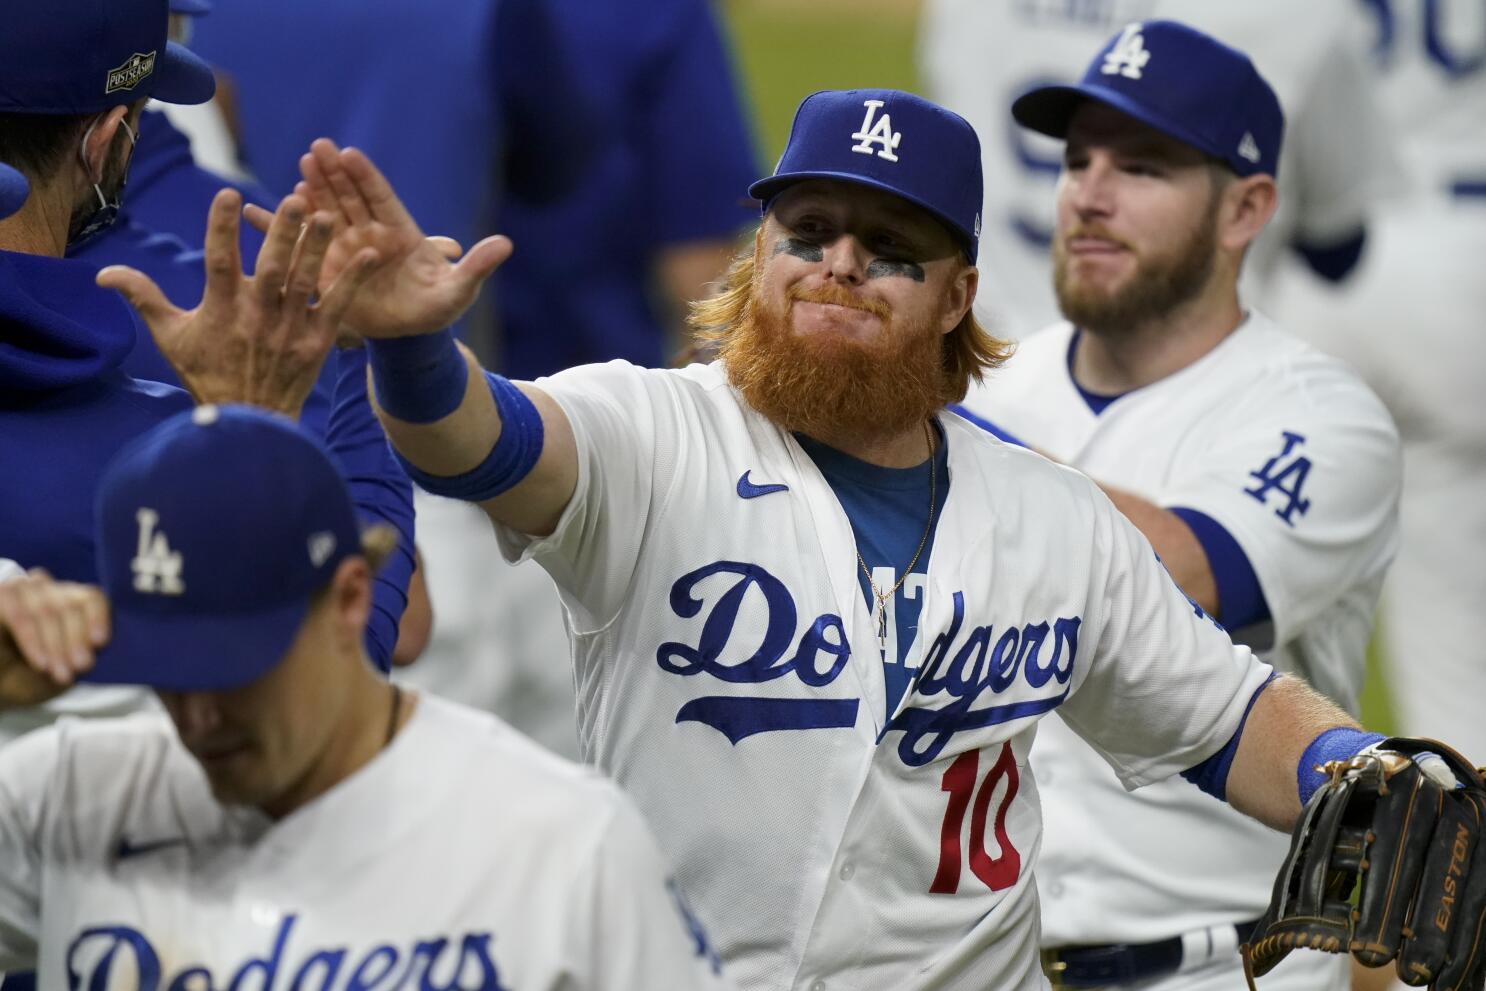 40) MLB confirms Dodgers' Justin Turner tested positive for Covid-19